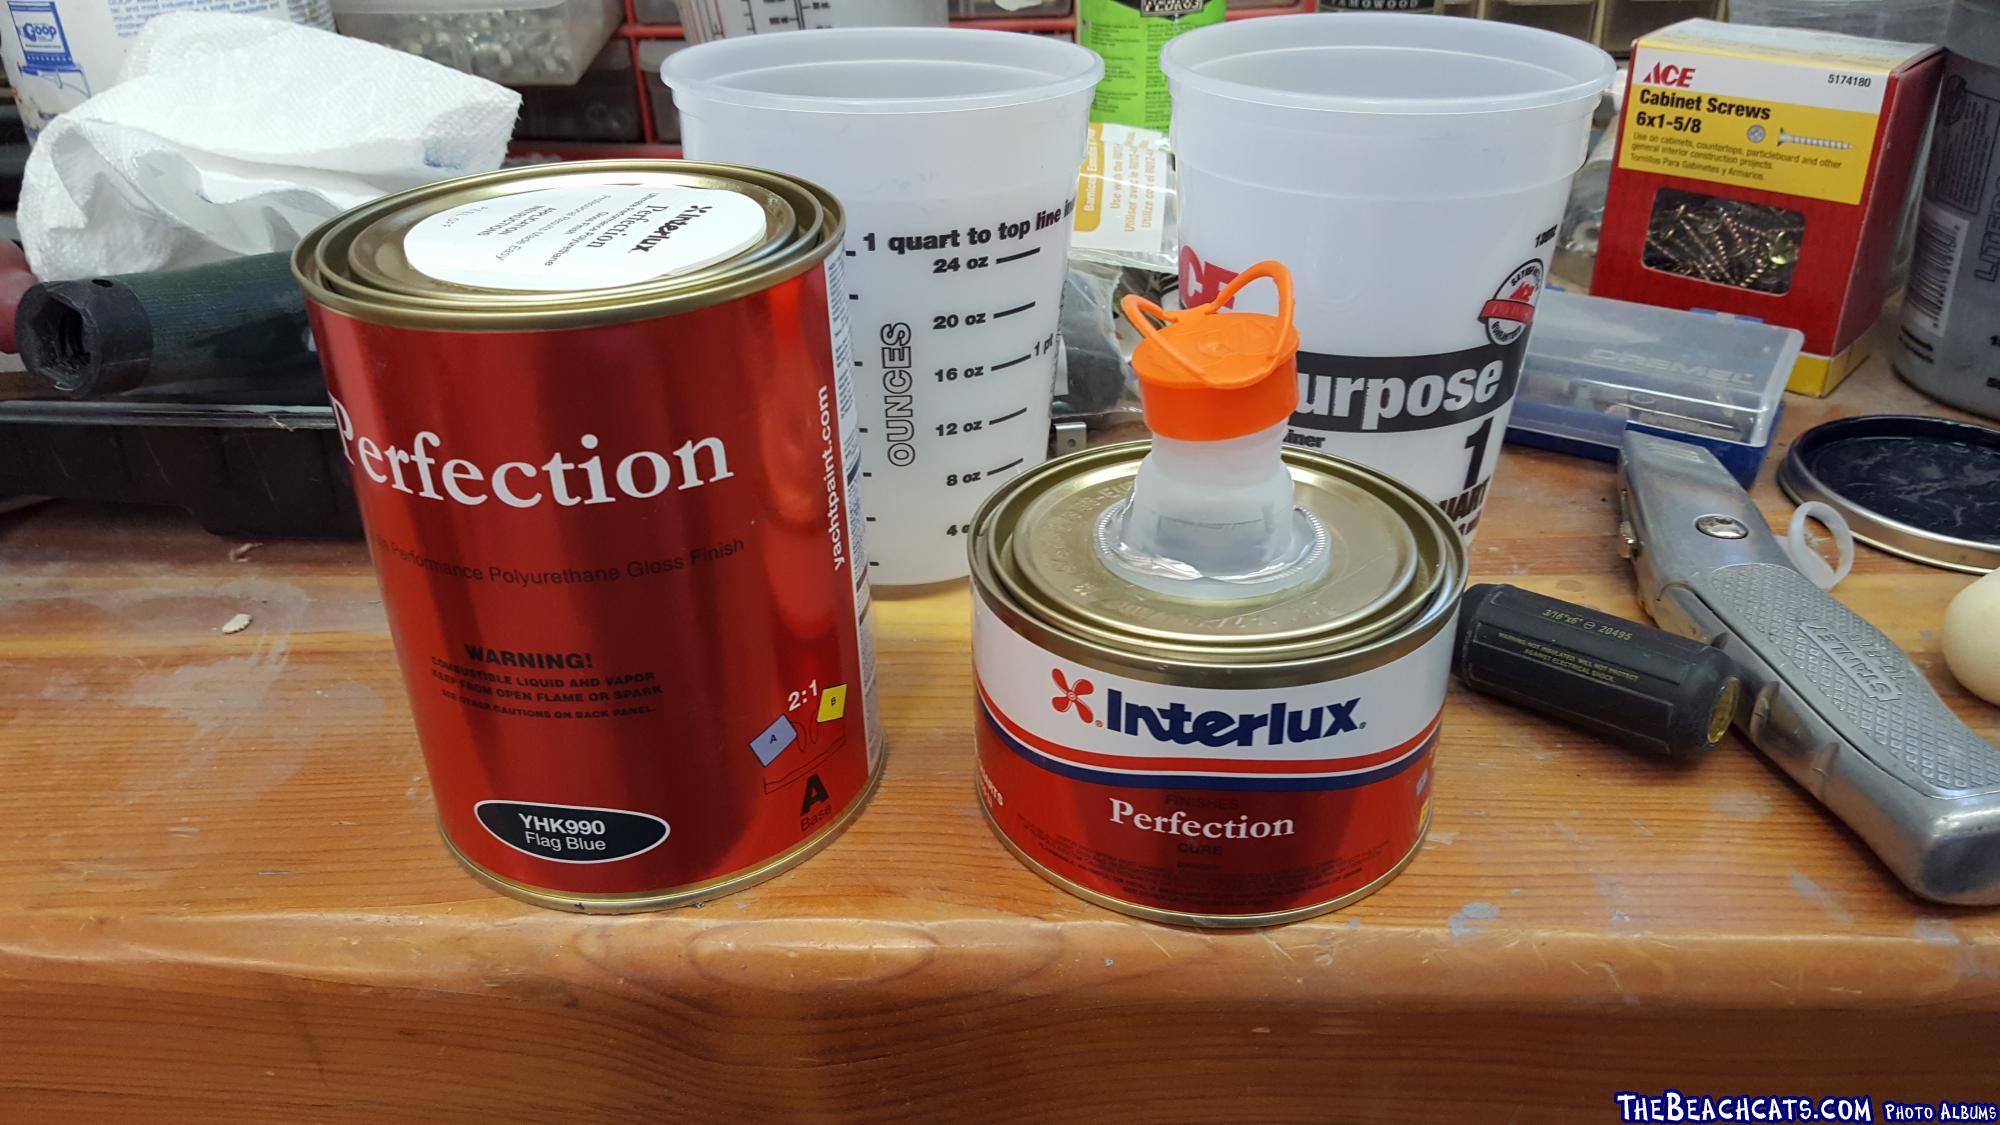 Interlux Perfection paint, with the spout on the small can pulled up